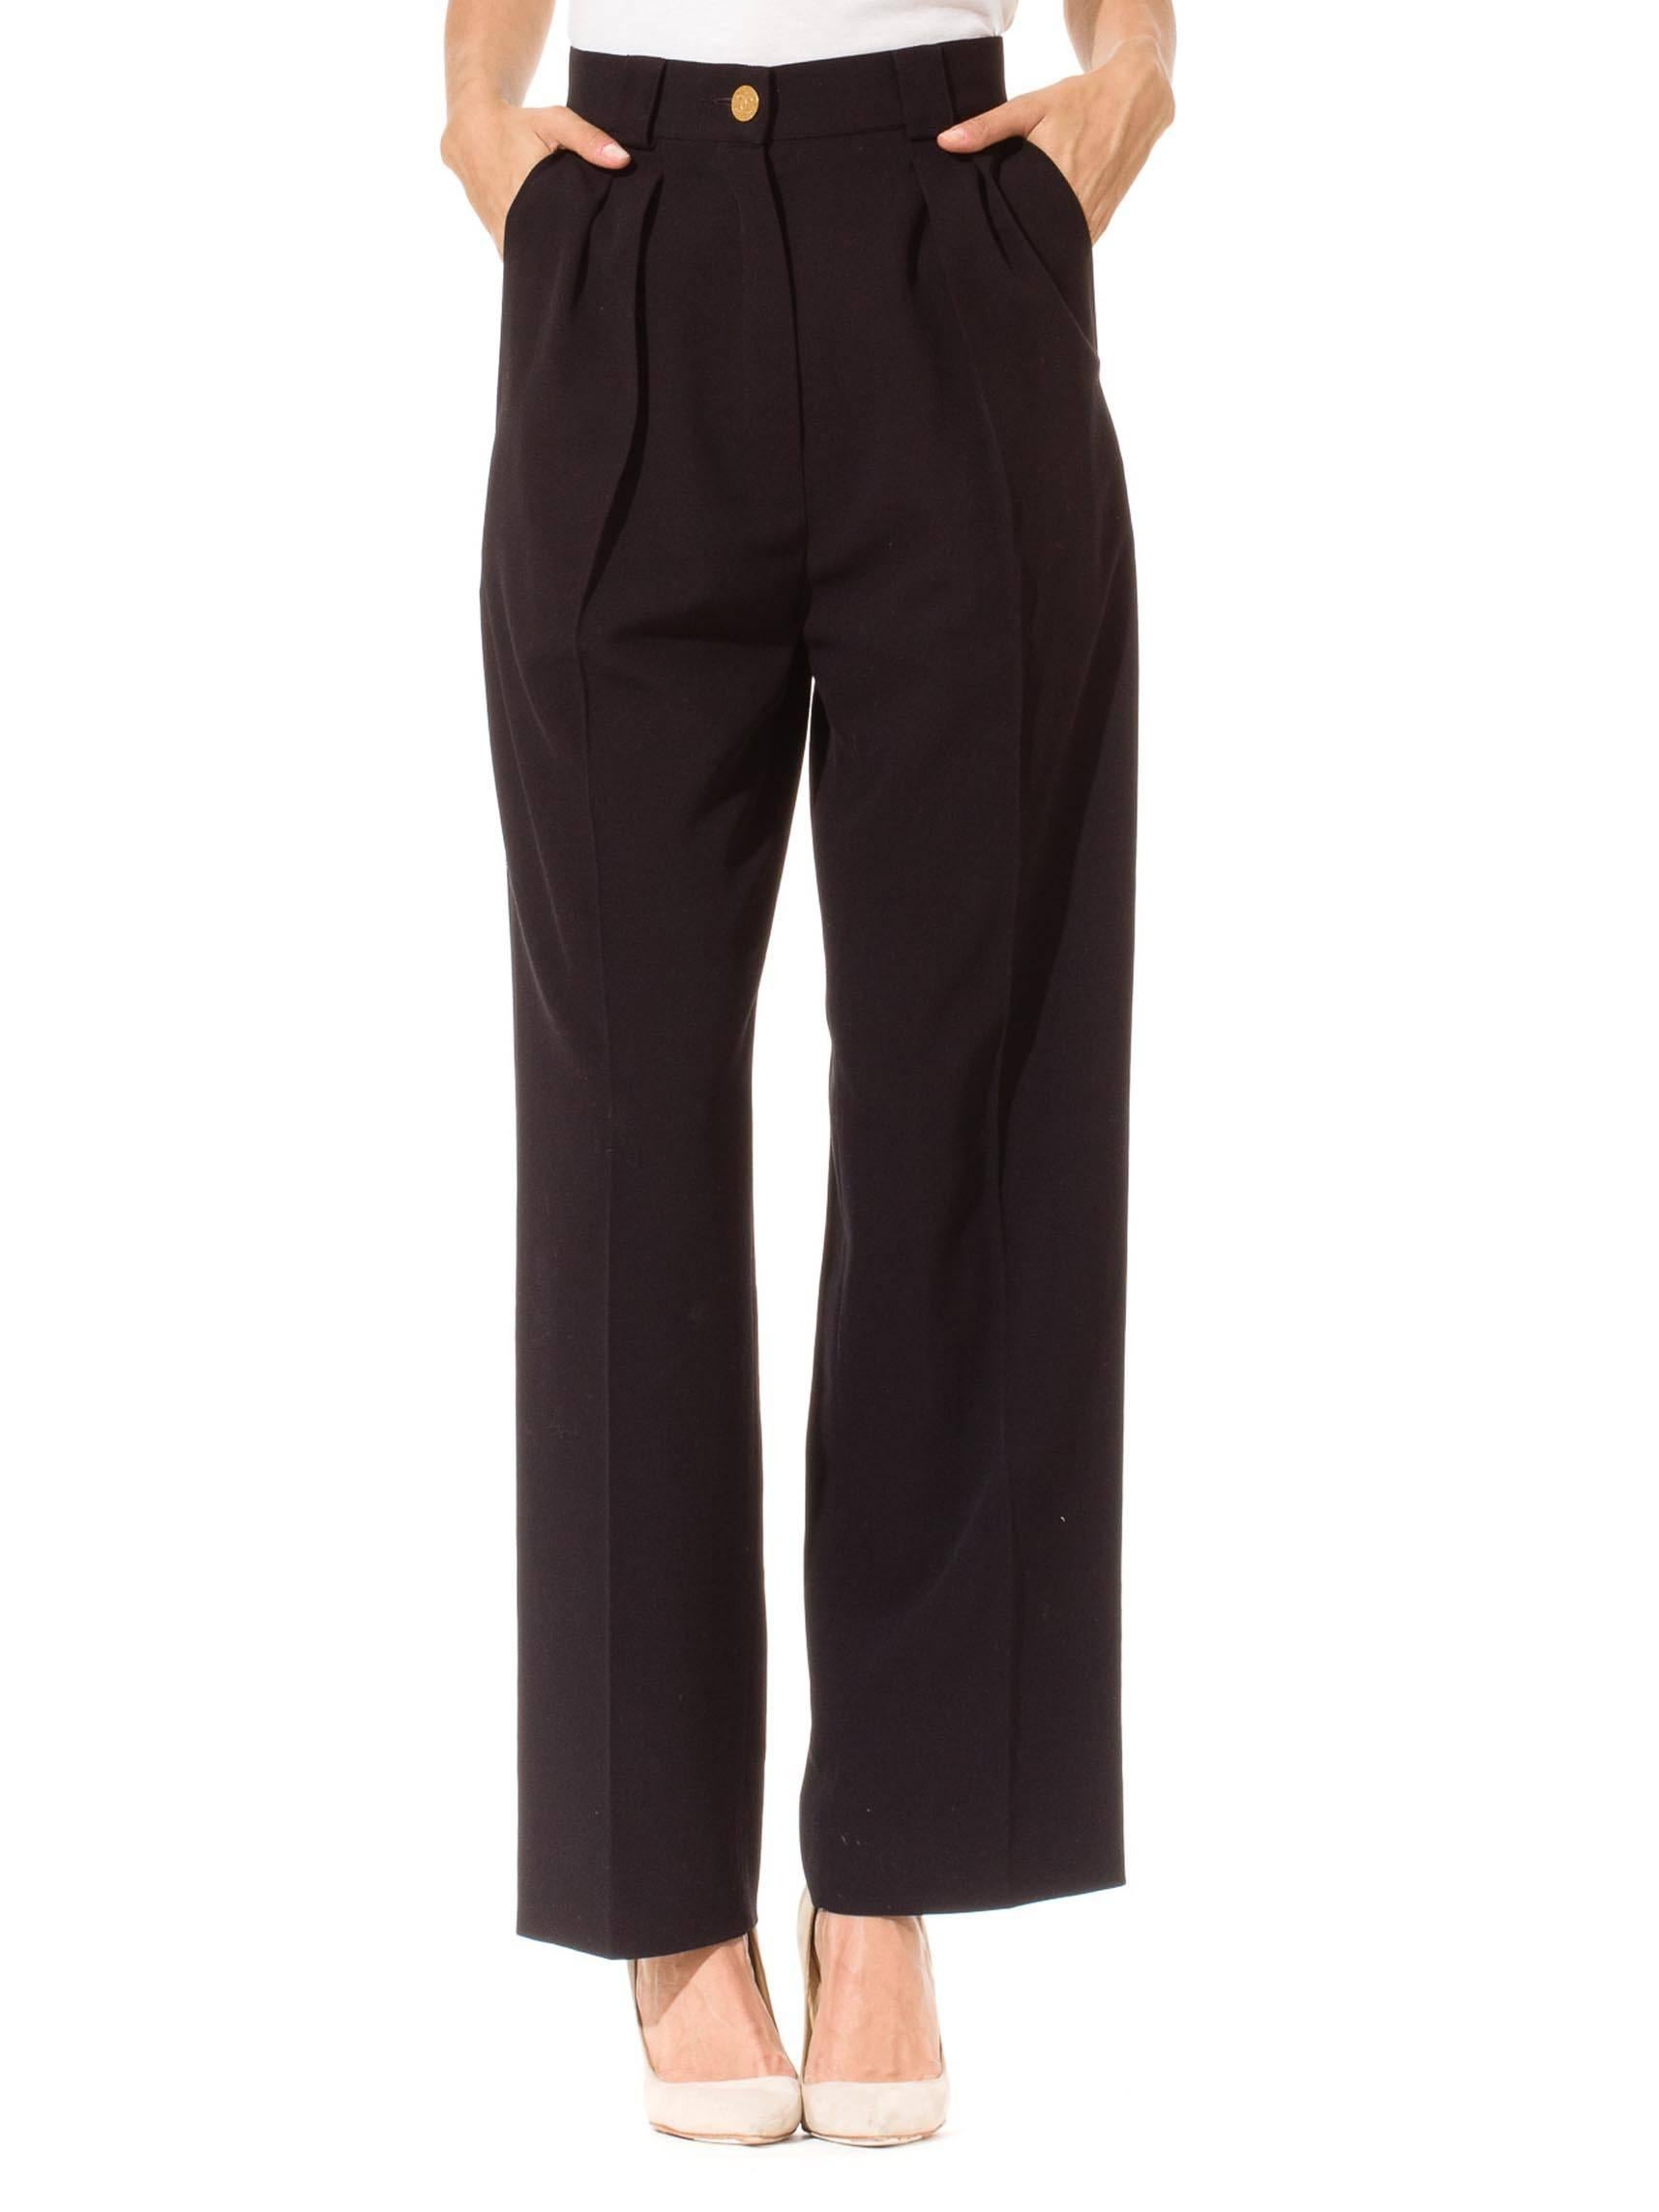 The perfect classic trousers are here! And with two luscious Chanel buttons to boot. A staple classic for every woman which surprisingly is nearly impossible to ever find. 